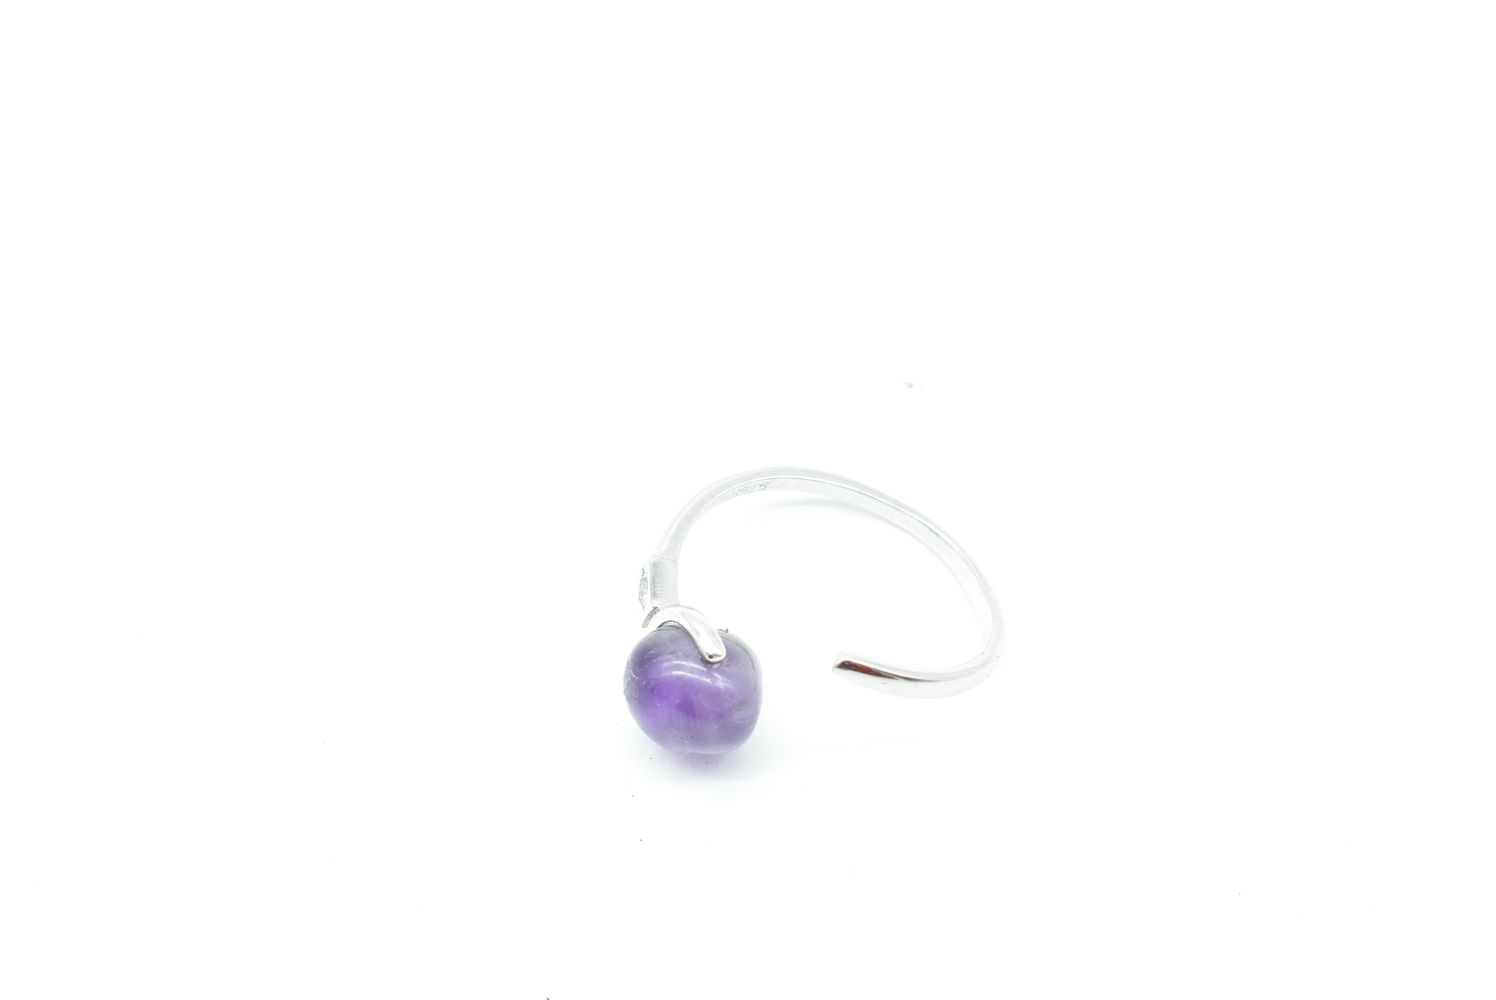 Ring with Amethyst stone and 925 silver - Adjustable